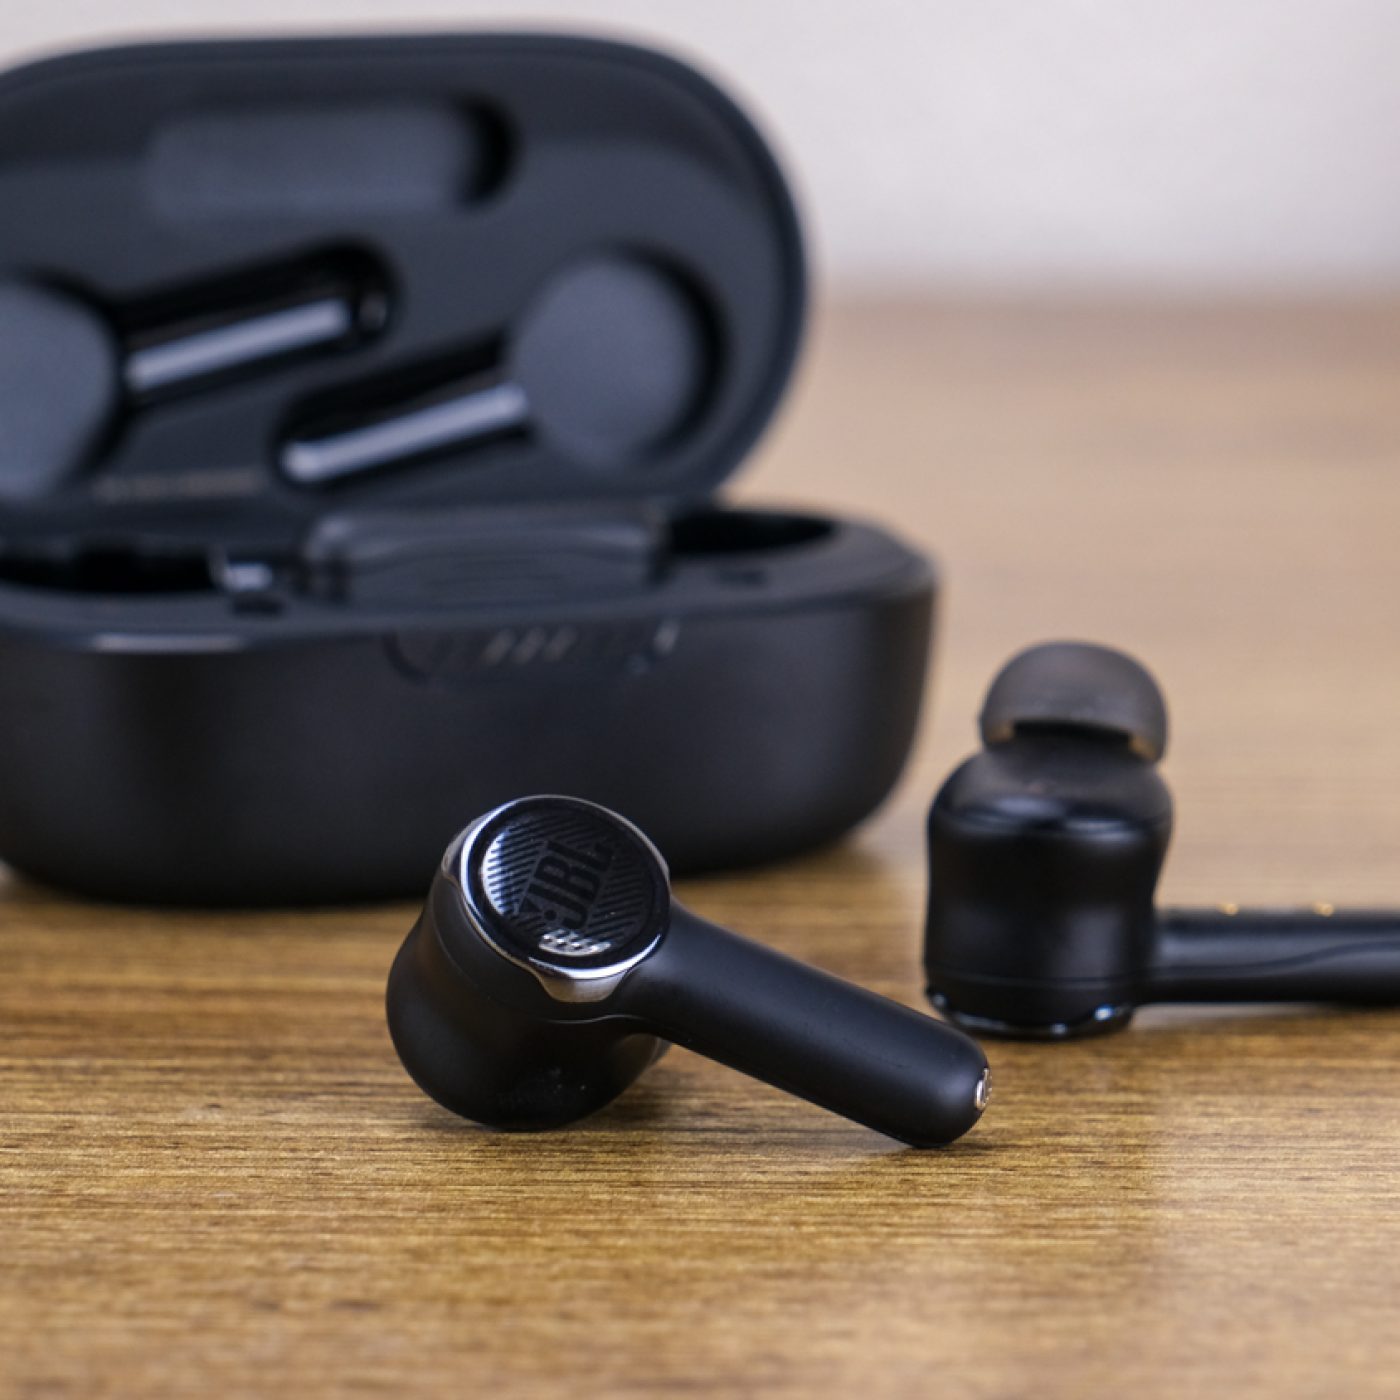 JBL Quantum TWS wireless earbuds earbuds the review: go gamers for Great on